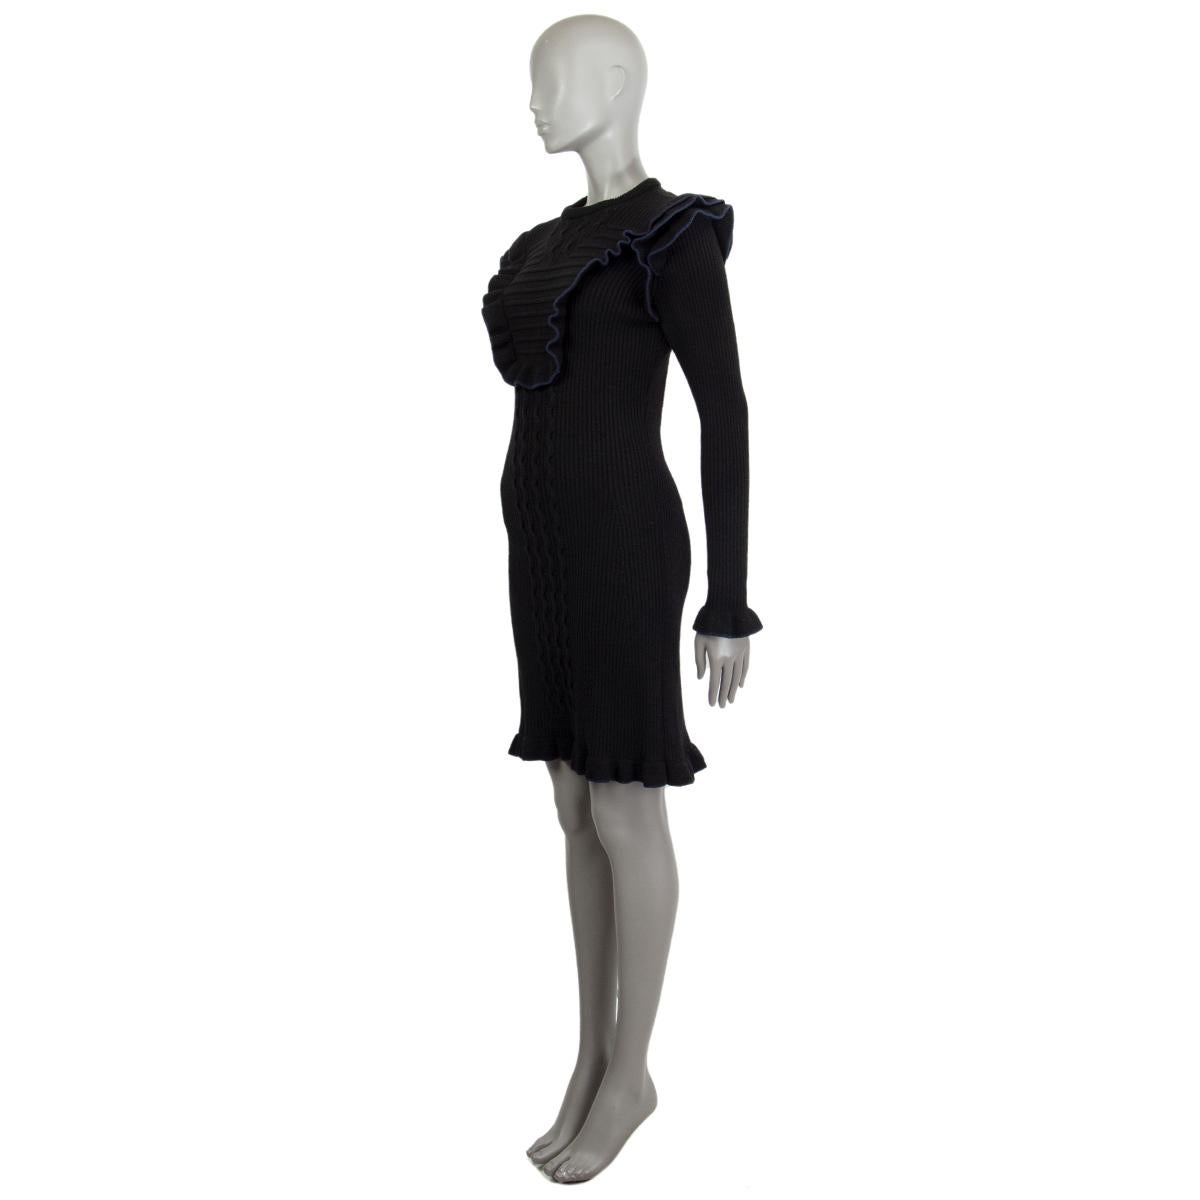 Fendi ribbed knit dress in black and navy blue missing tag (probably wool blend) with a detailed ruffle-trim all over, round neck, long sleeves, elastic fabric and mid weight knit. Unlined. Has been worn and in excellent condition.

Tag Size Missing